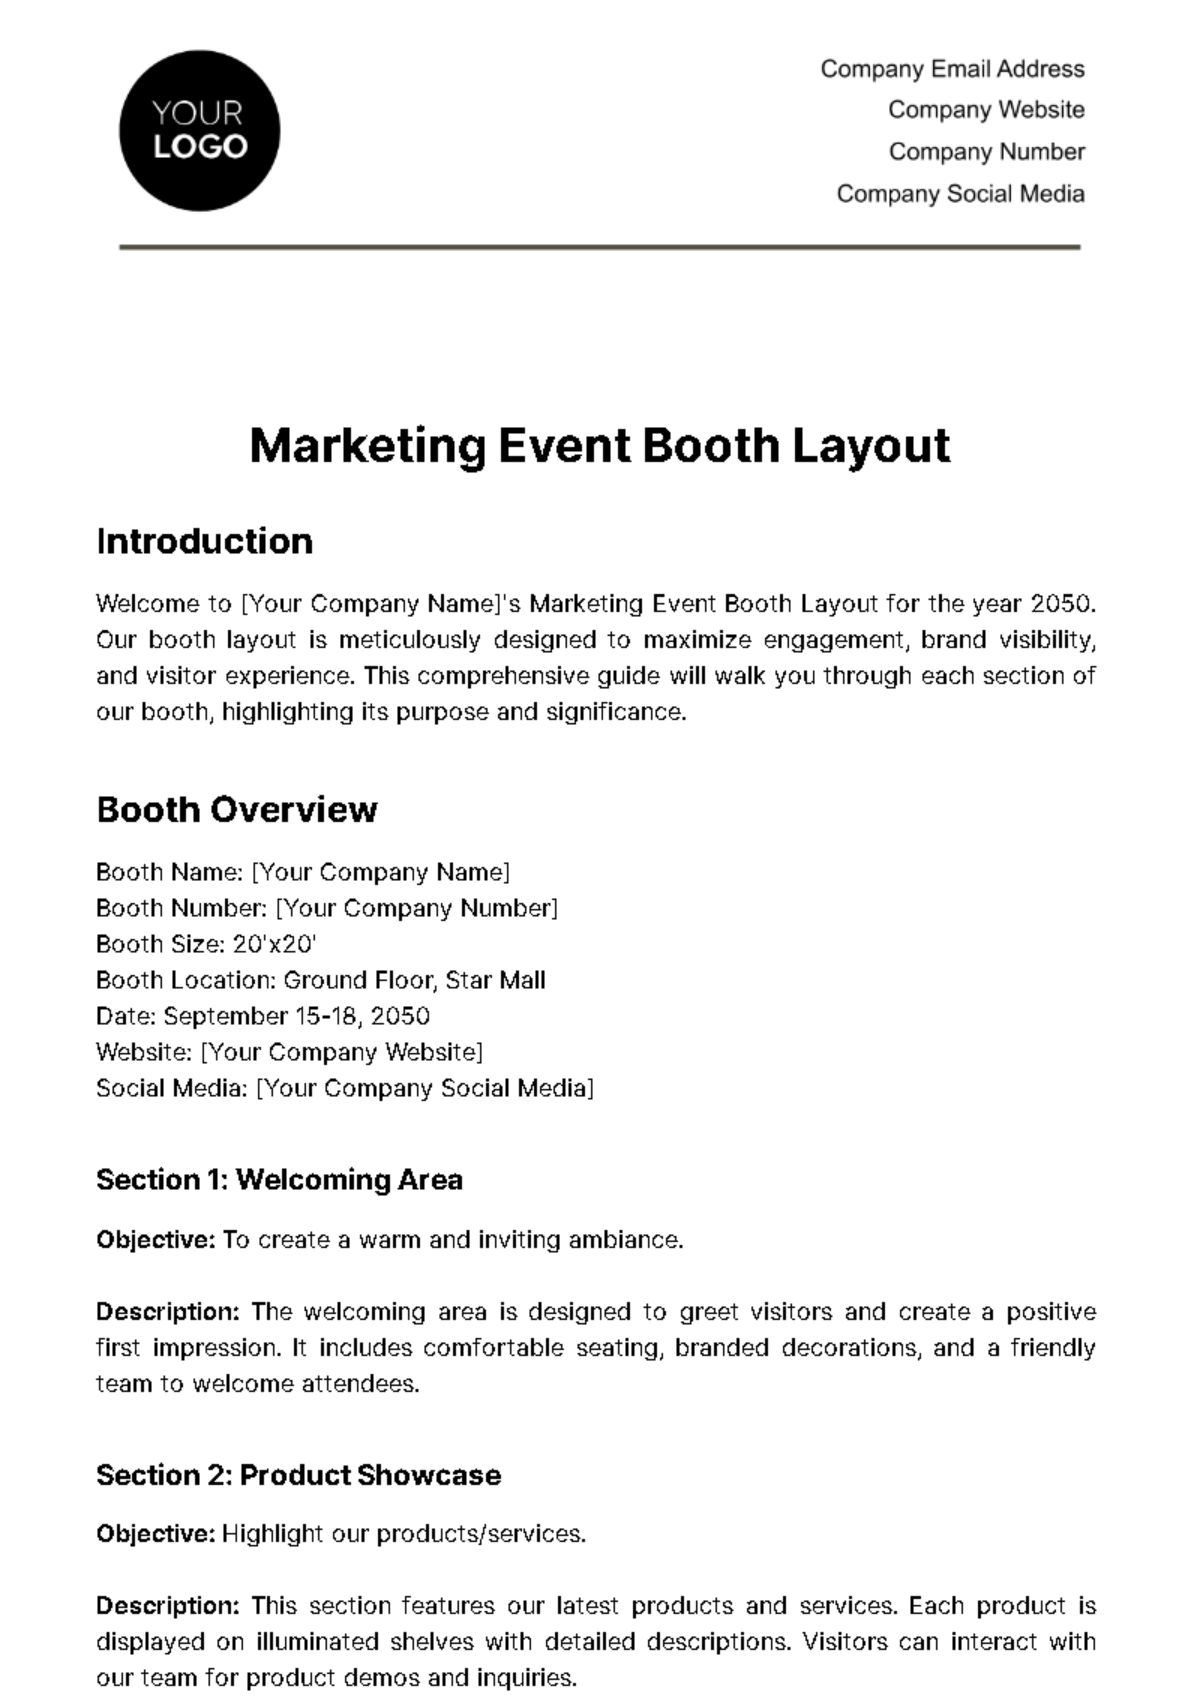 Marketing Event Booth Layout Template